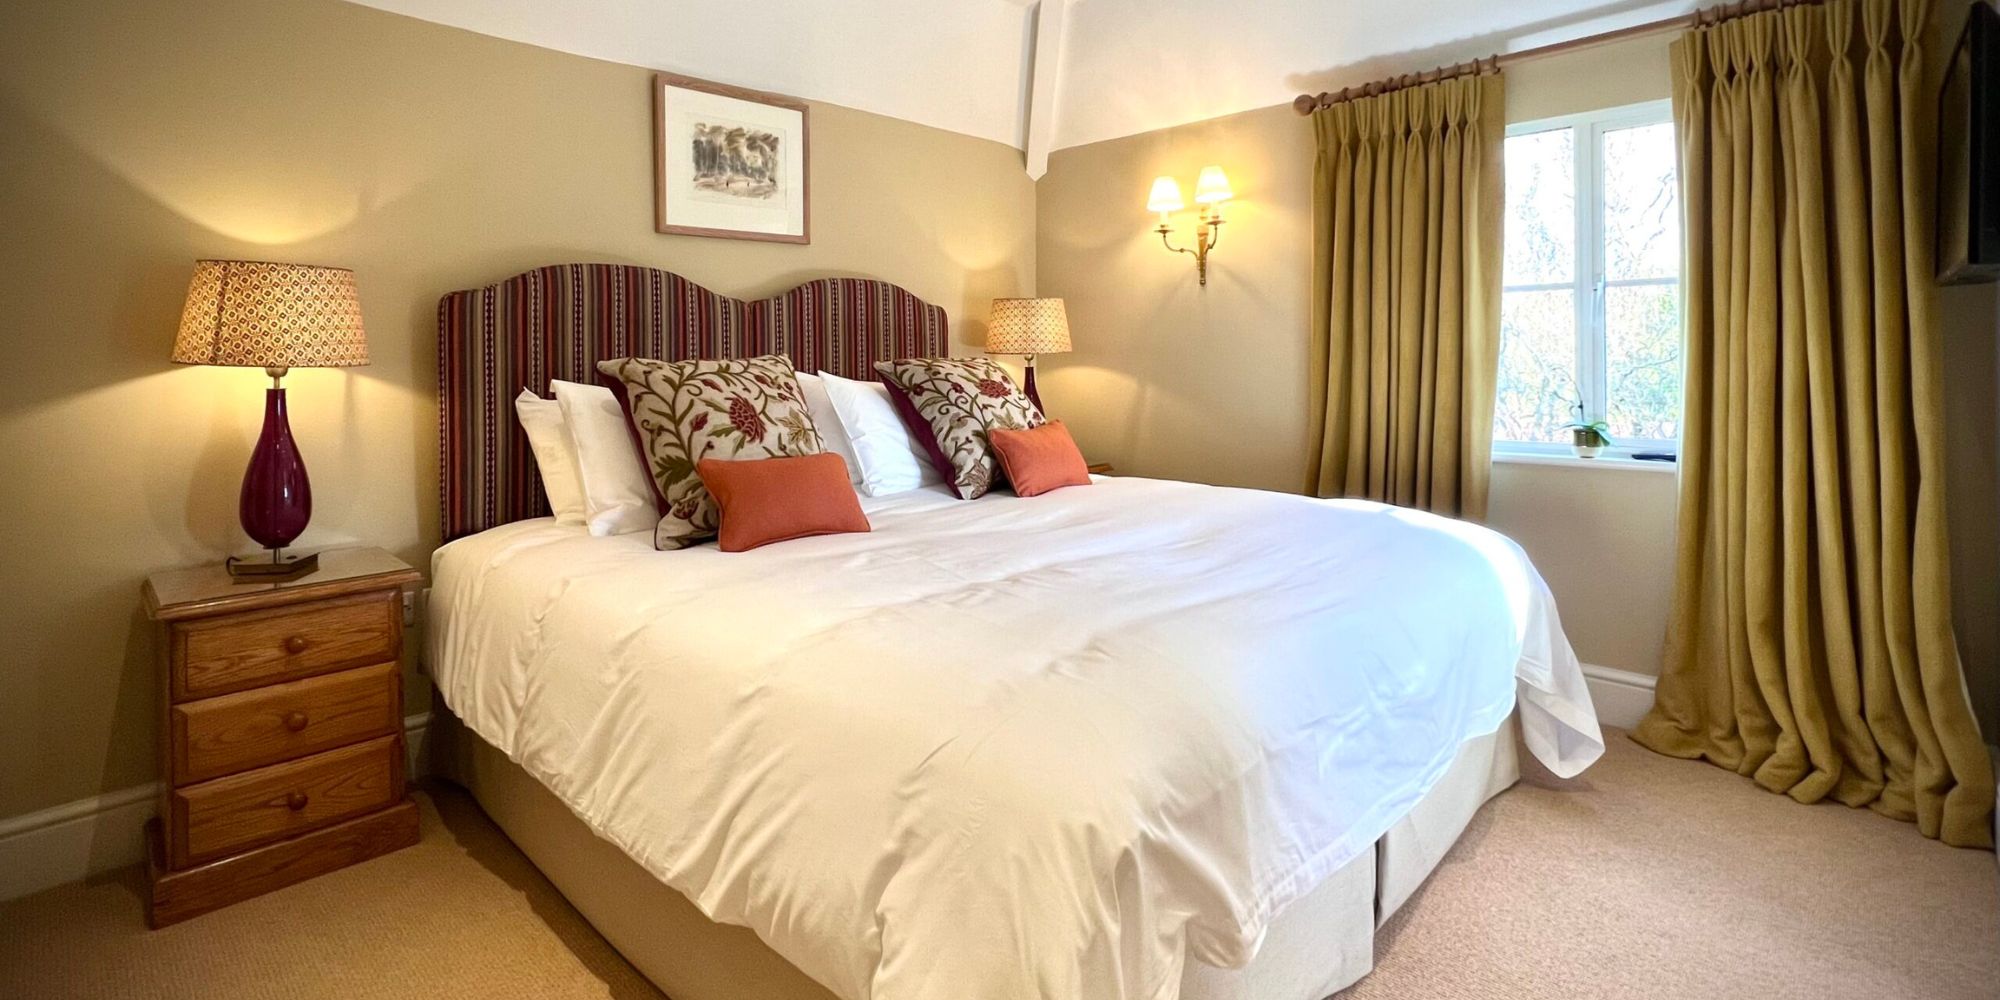 Book a room at The Kings Head, Holmbury St Mary